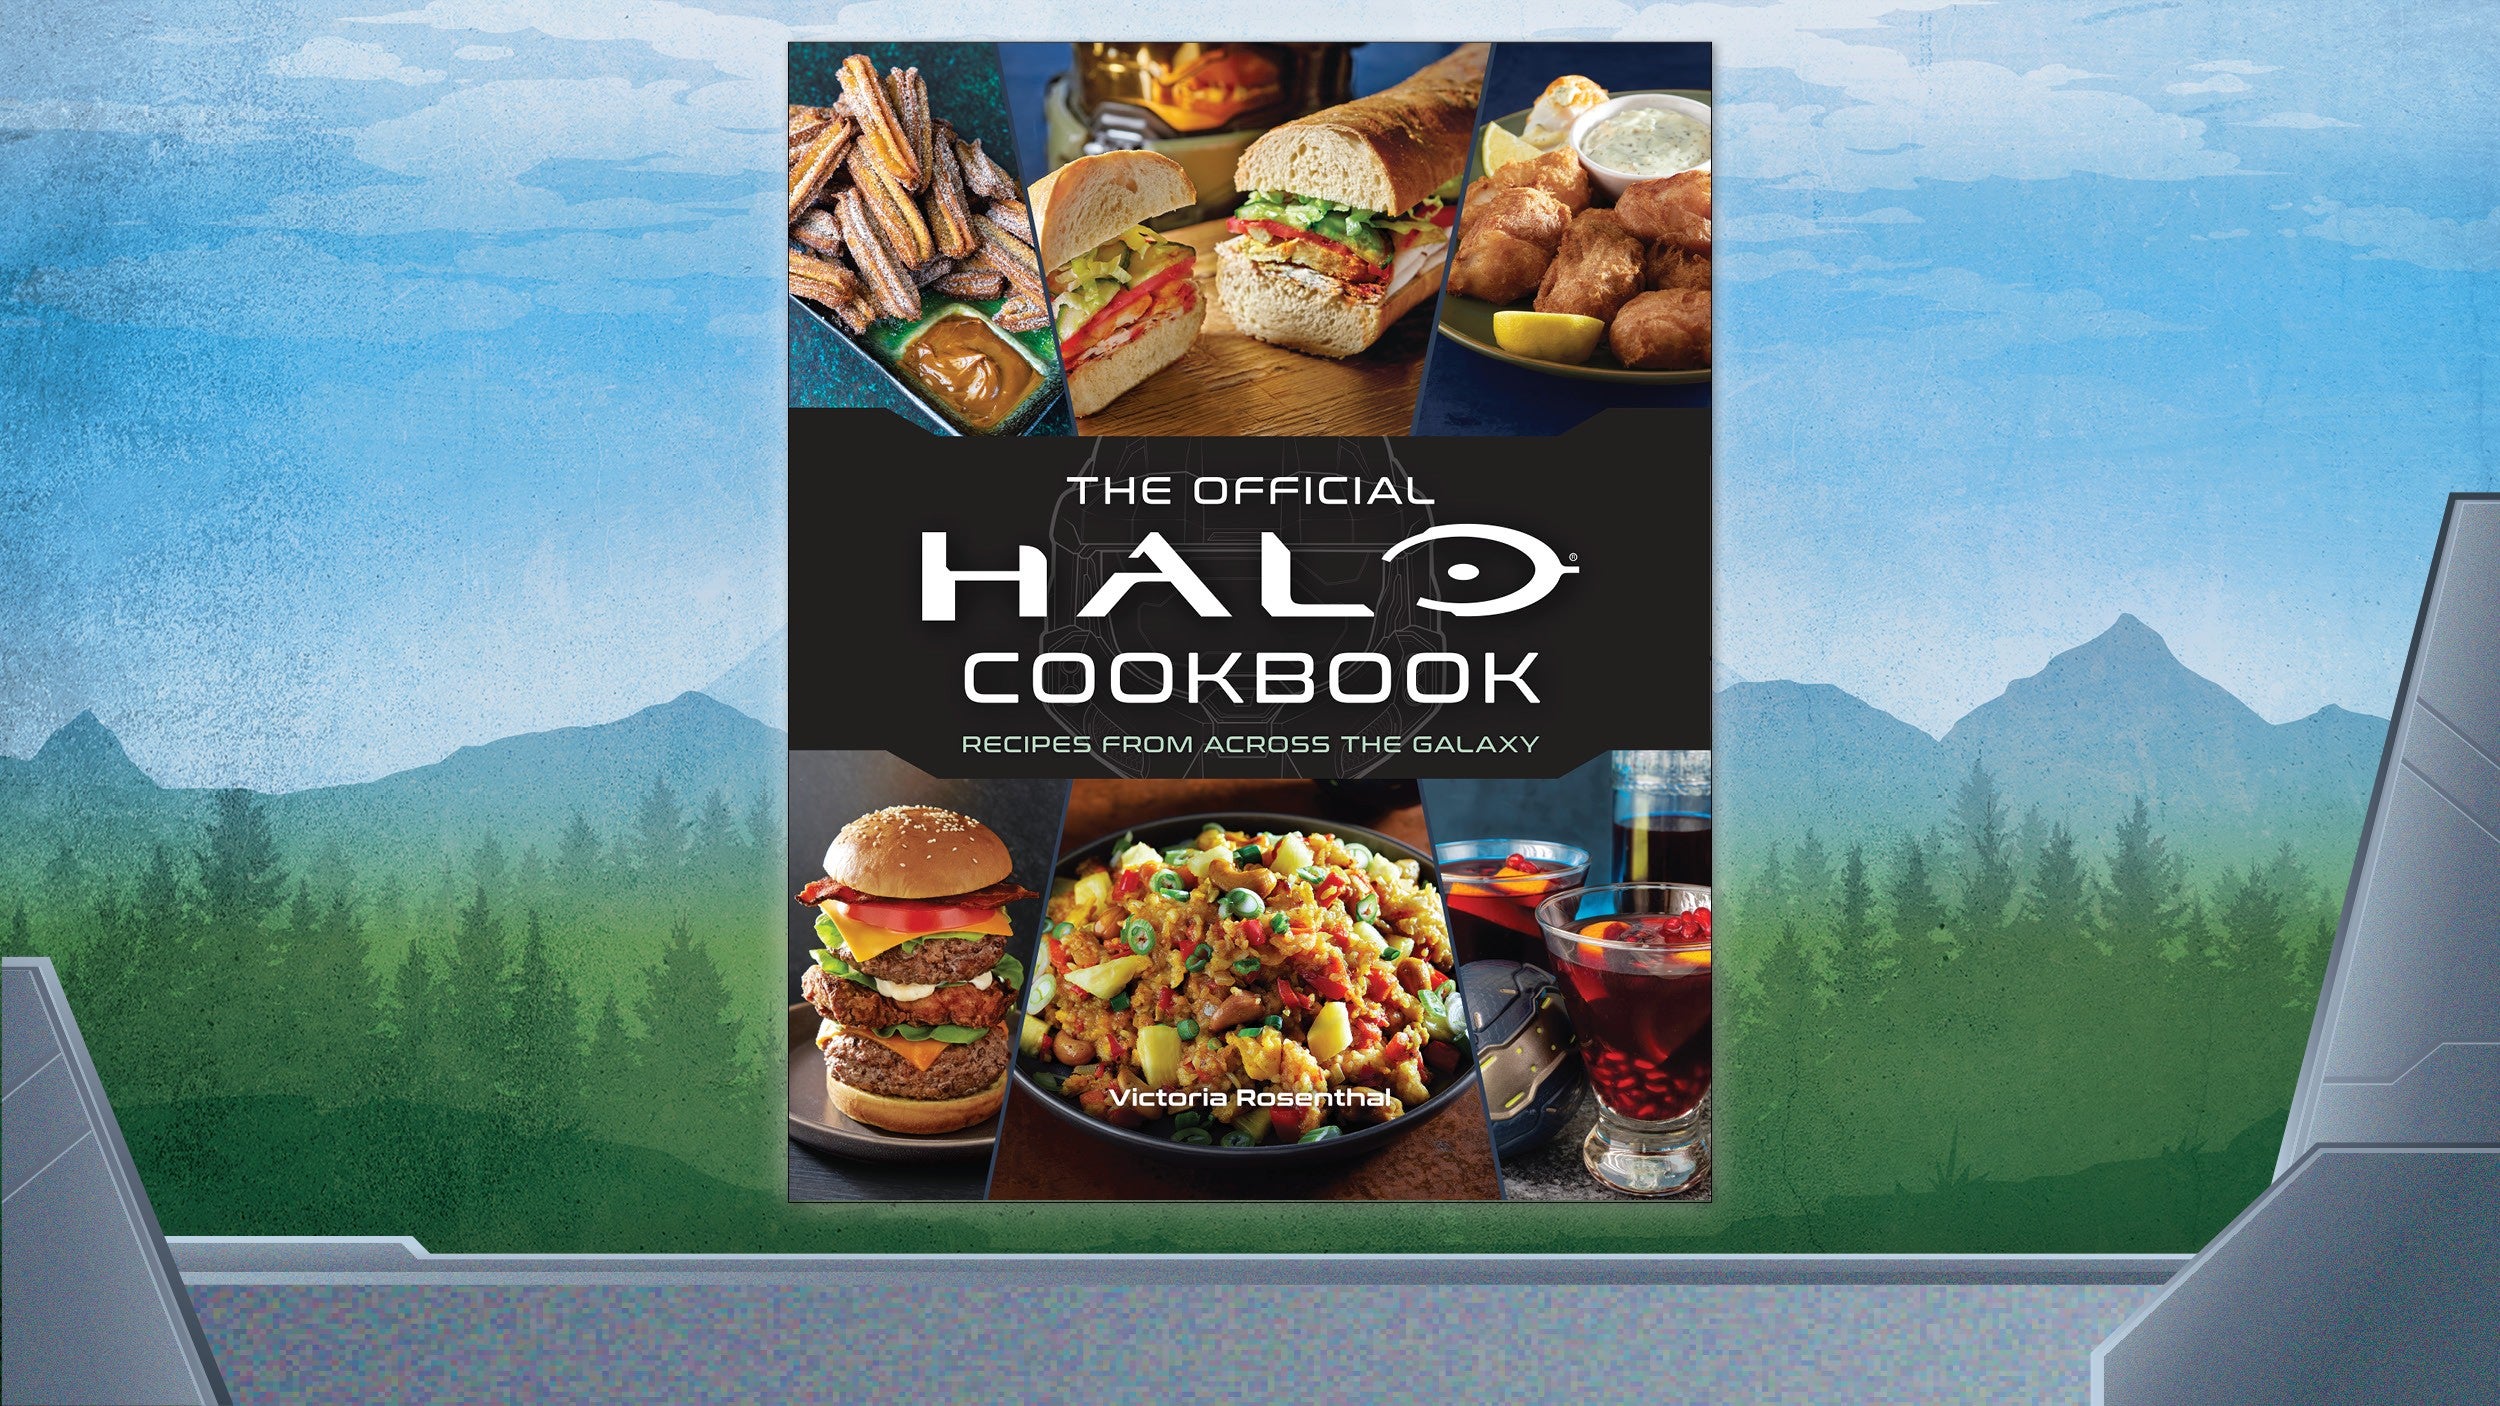 Image for An official Halo cookbook has been revealed